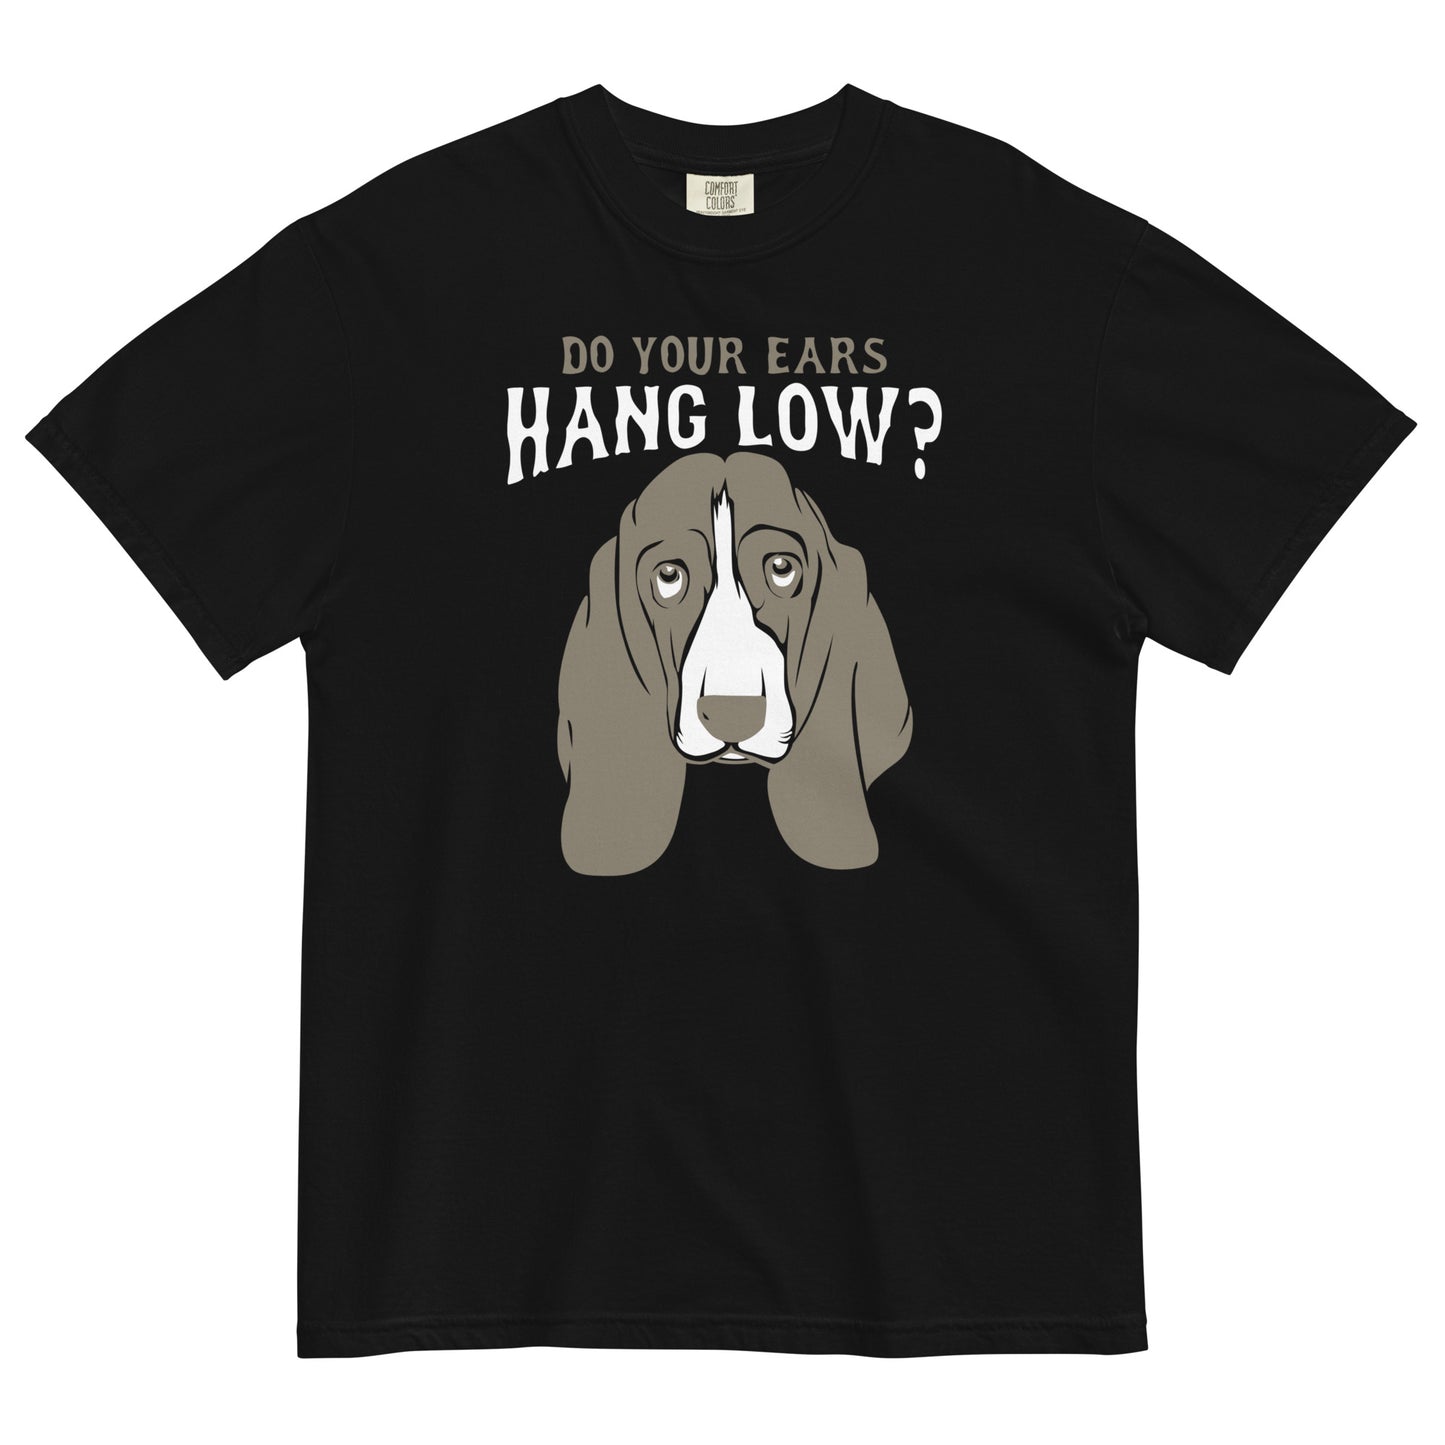 Do Your Ears Hang Low? Men's Relaxed Fit Tee